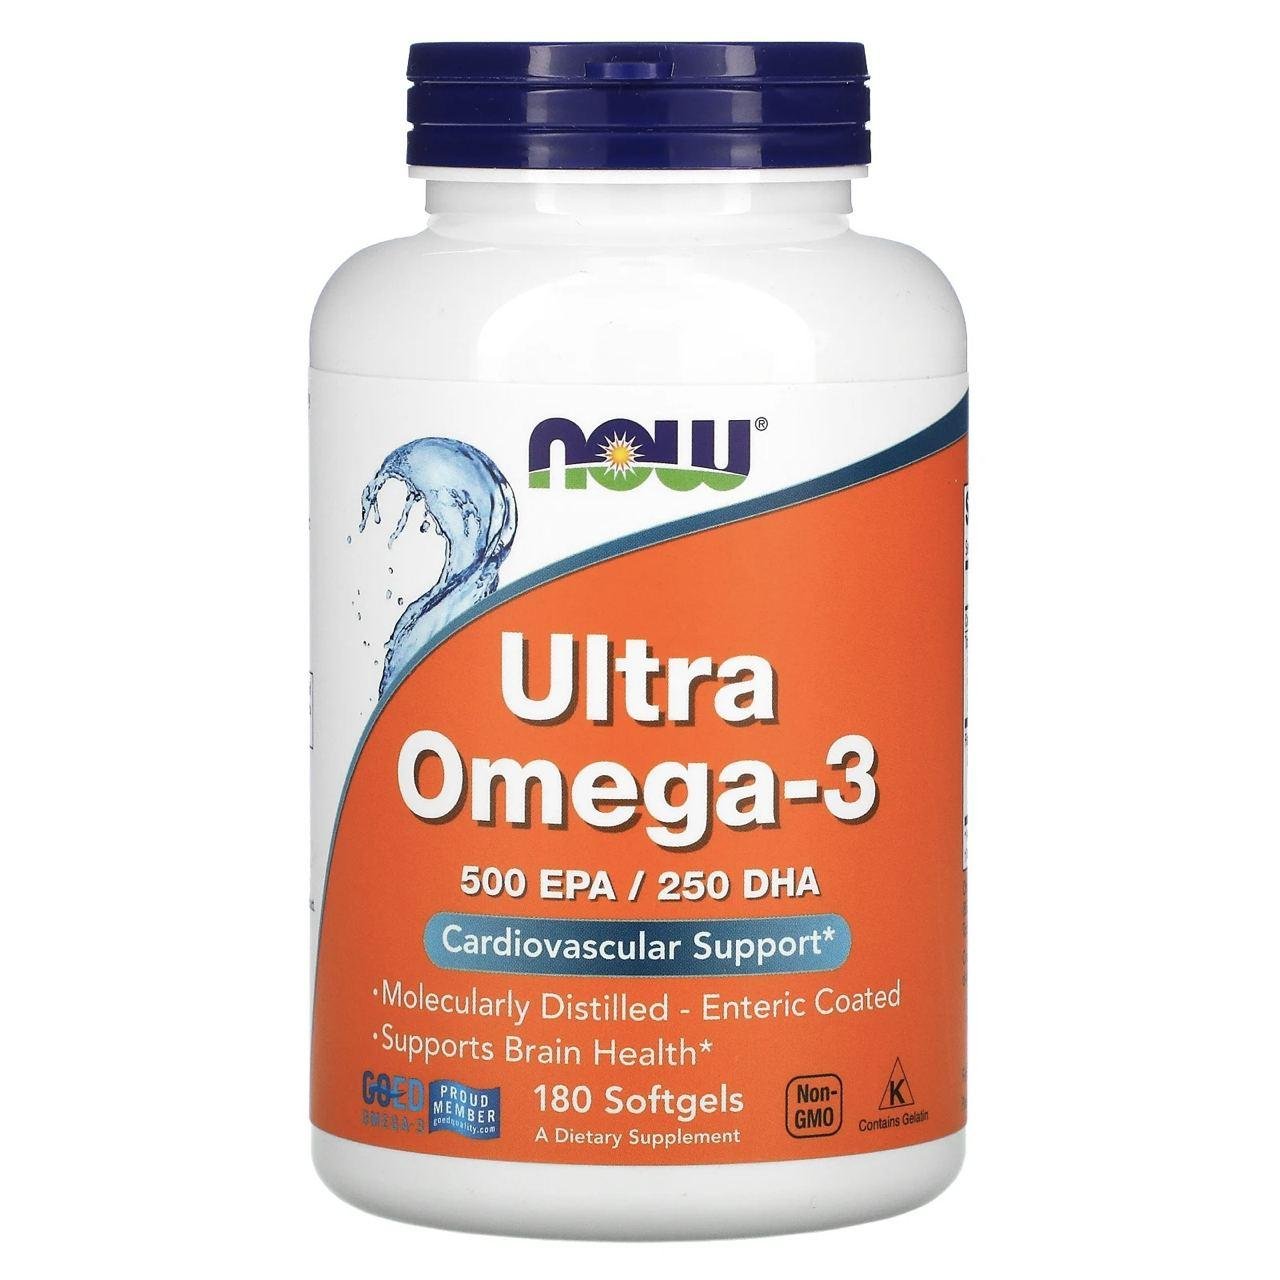 Жирні кислоти NOW Foods Ultra Omega-3 (500 EPA/250 DHA) 180 Softgels,  ml, Now. Omega 3 (Fish Oil). General Health Ligament and Joint strengthening Skin health CVD Prevention Anti-inflammatory properties 